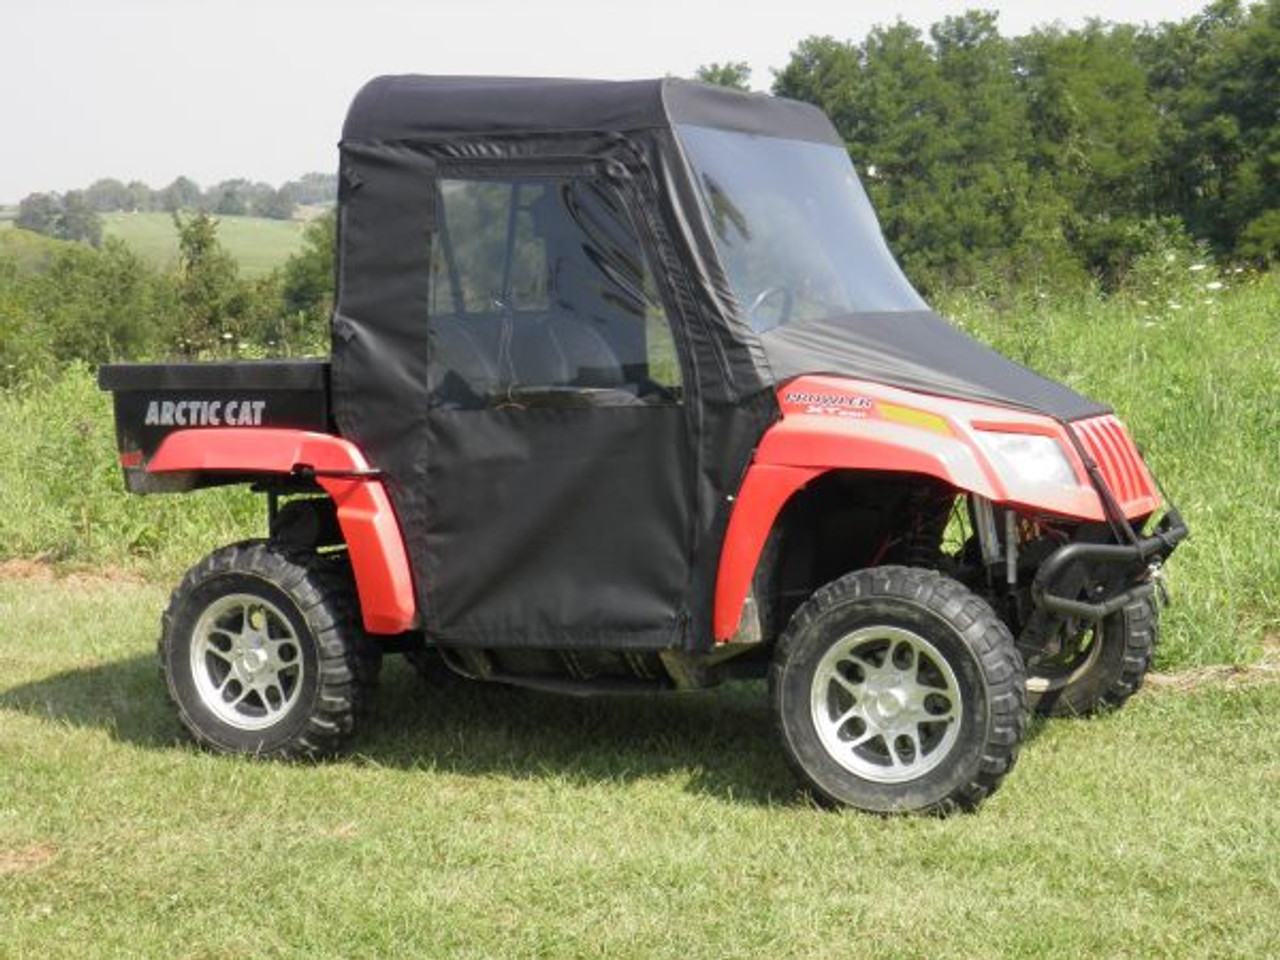 Full cab enclosure with vinyl windshield side view